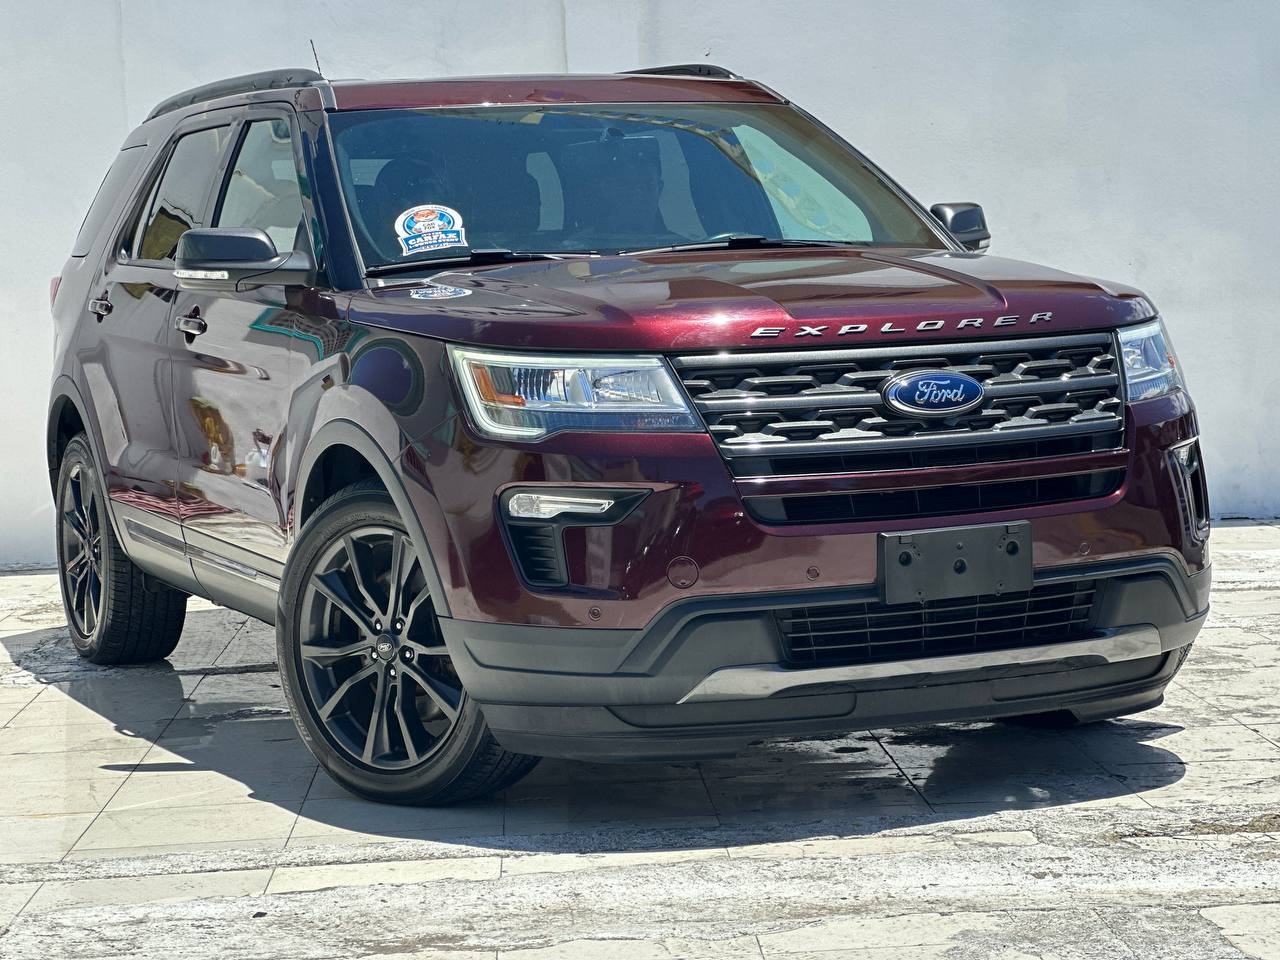 jeepetas y camionetas - FORD EXPLORER PANORAMICA 4x4 2018CLEAN CARFAX 0